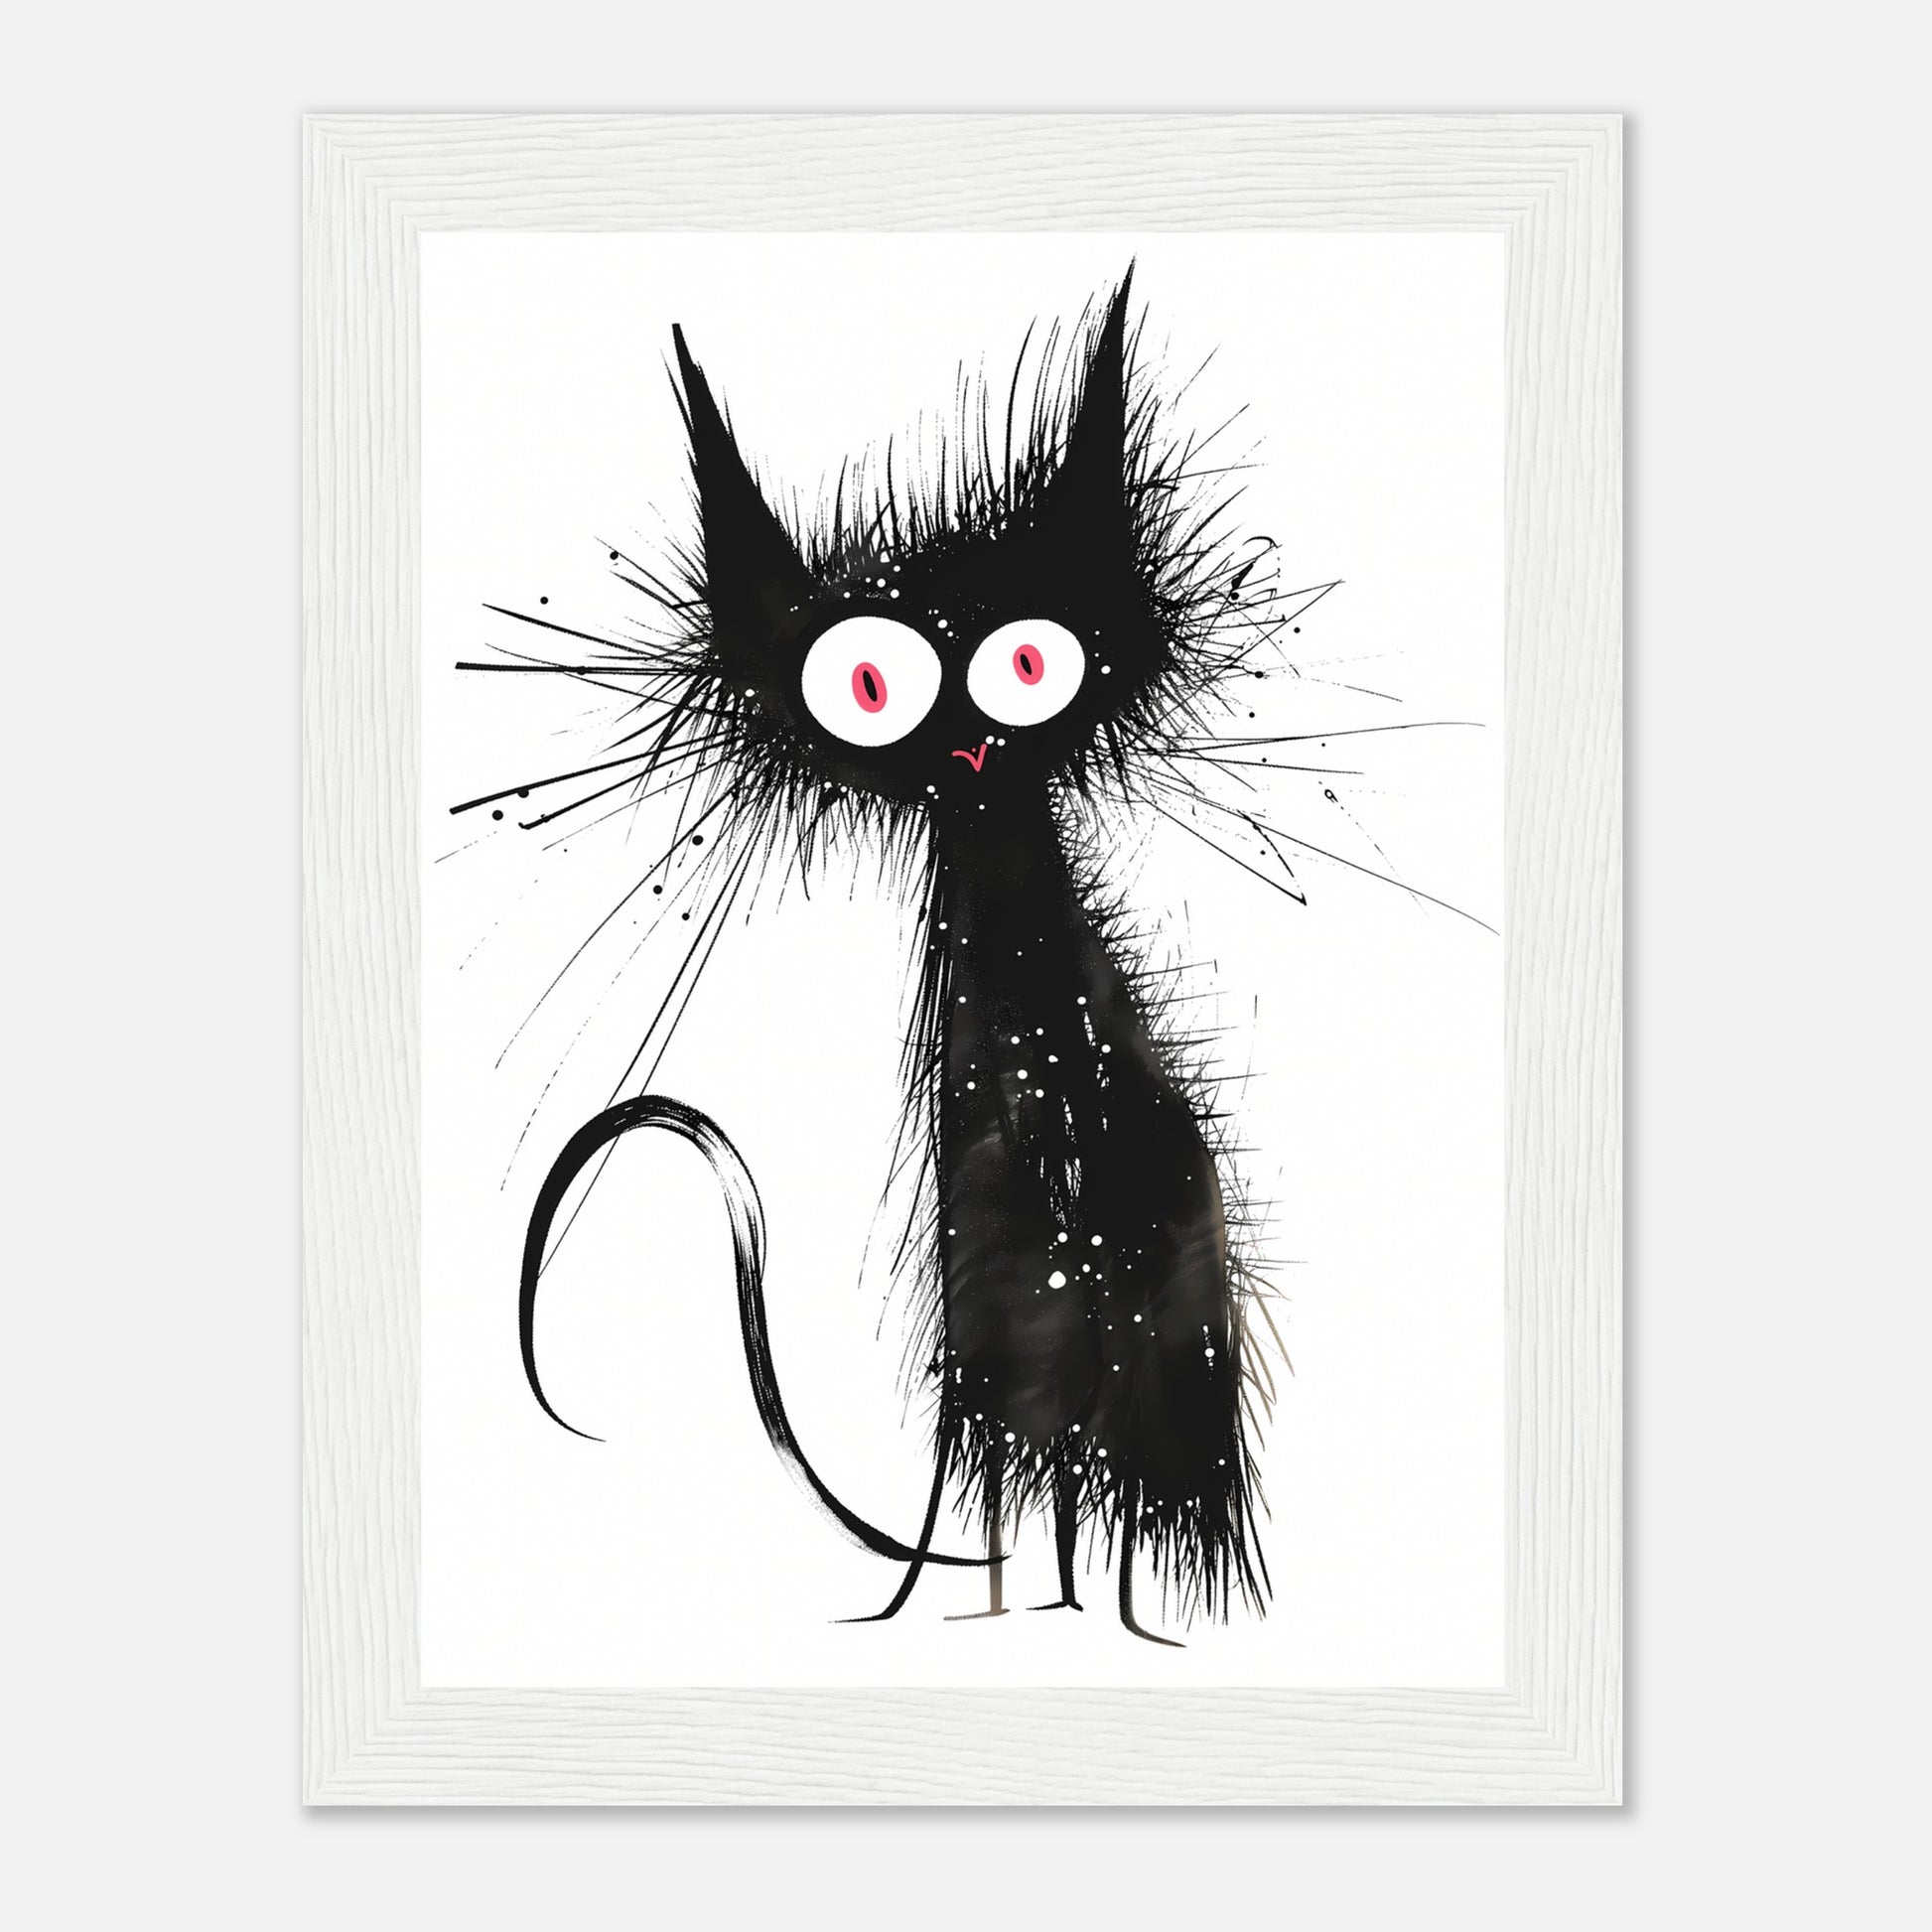 Illustration of a whimsical black cat with large eyes and spiky fur in a frame.